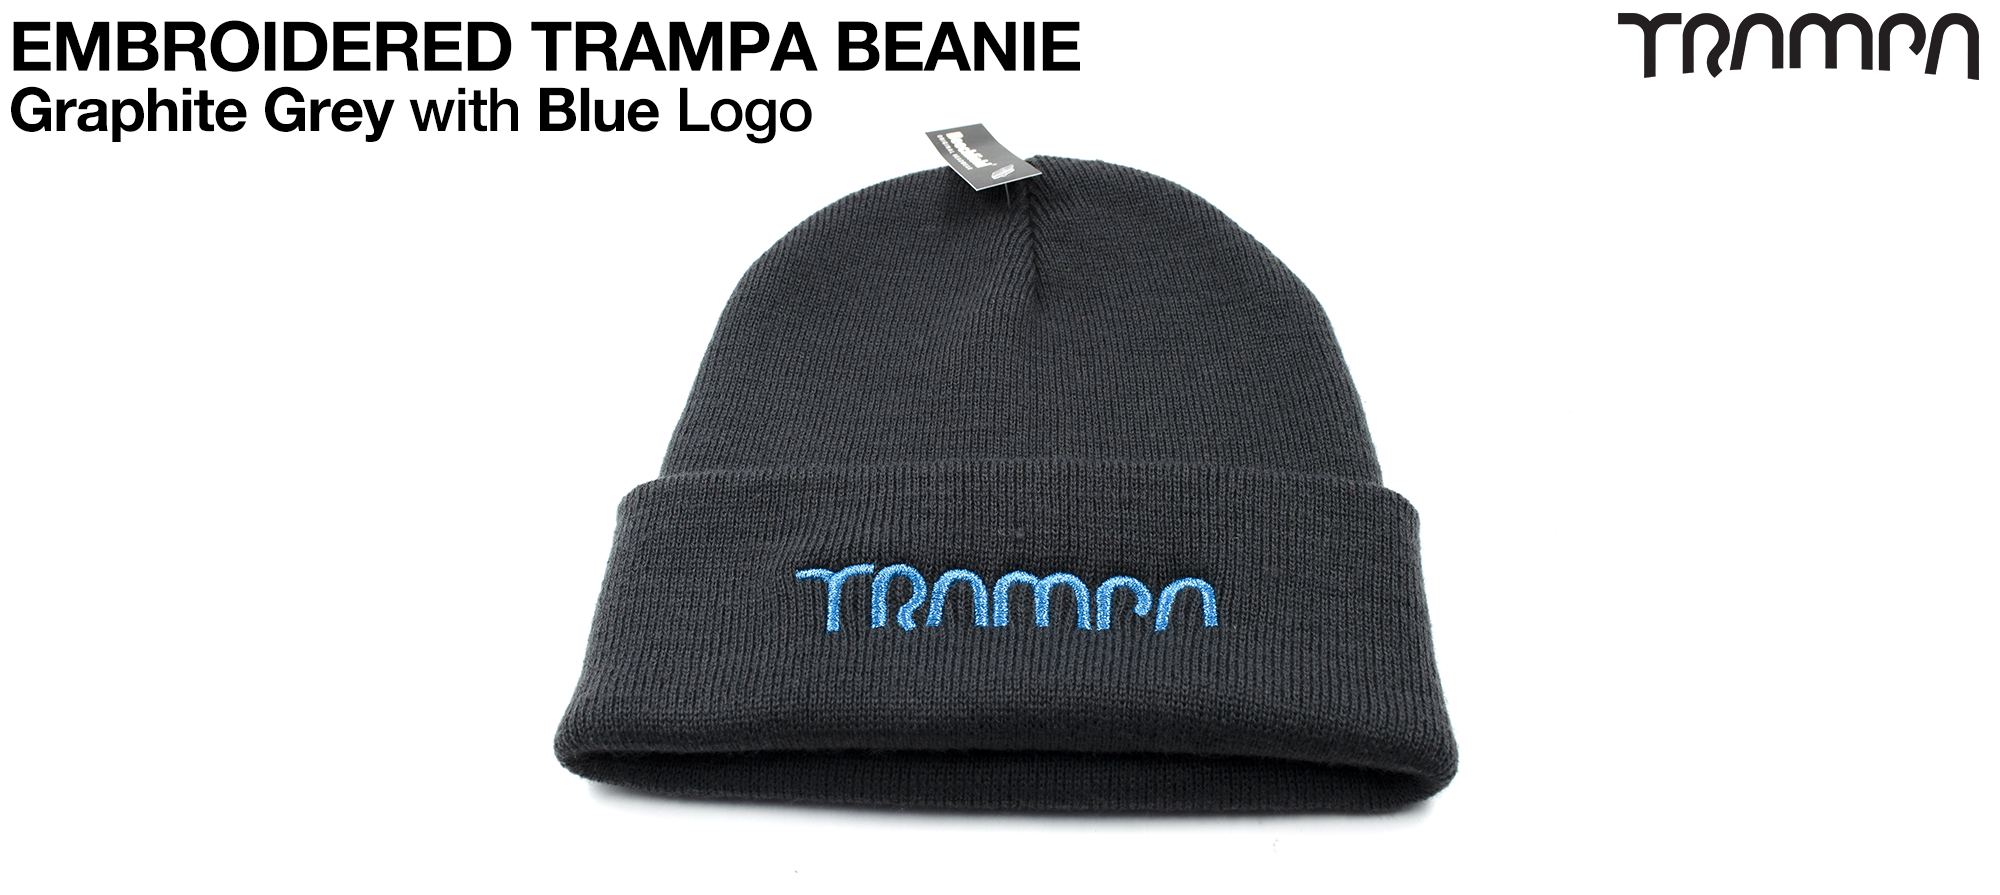 Graphite GREY Woolly hat with Electric BLUE TRAMPA logo